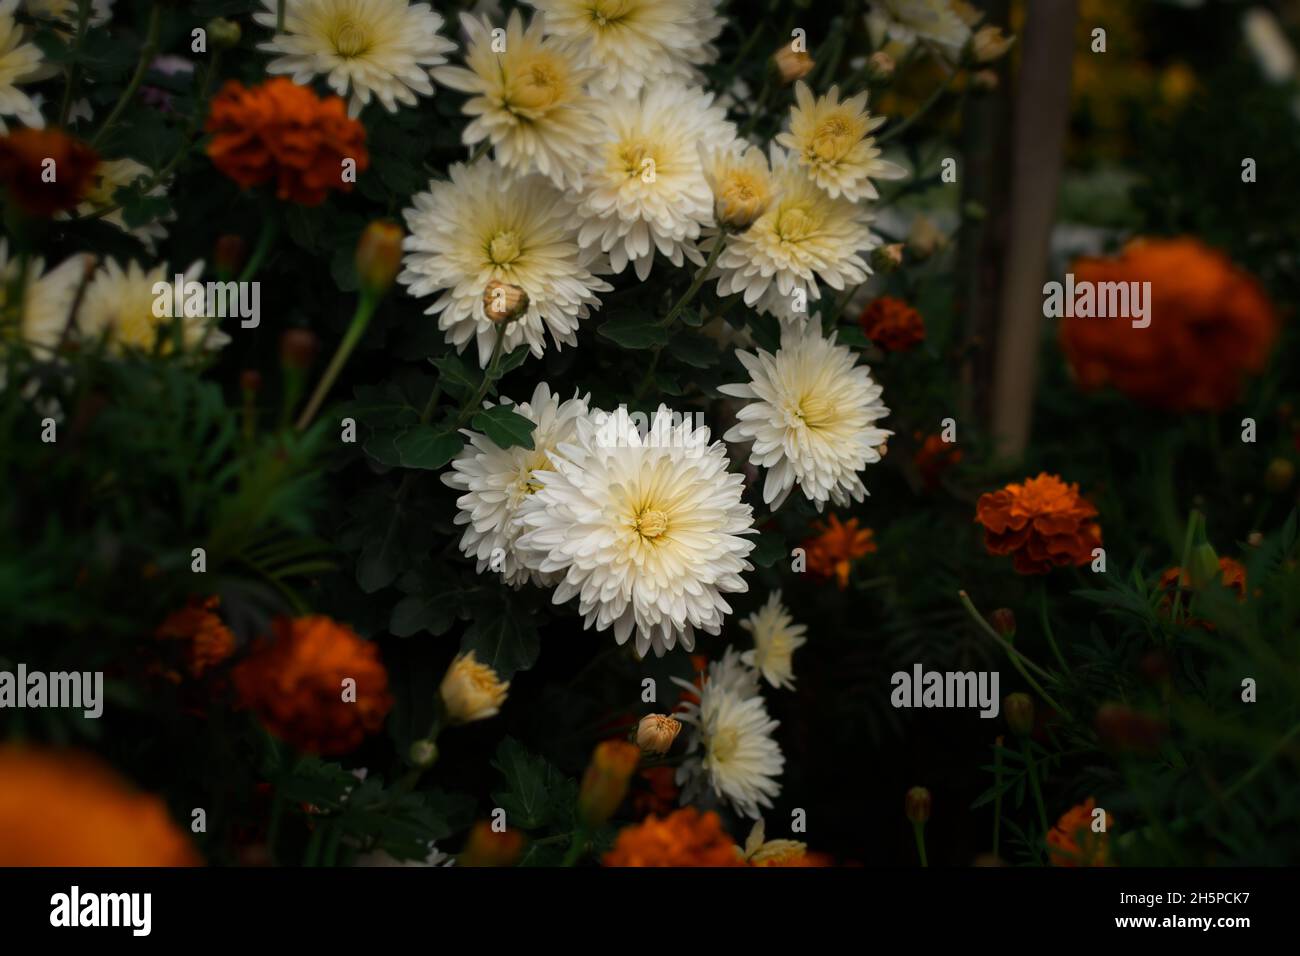 Chrysanthemum garden. White autumn flowers among orange ones in a flower bed. Beautiful delicate chrysanthemums bloomed in the park. Soft focus Stock Photo